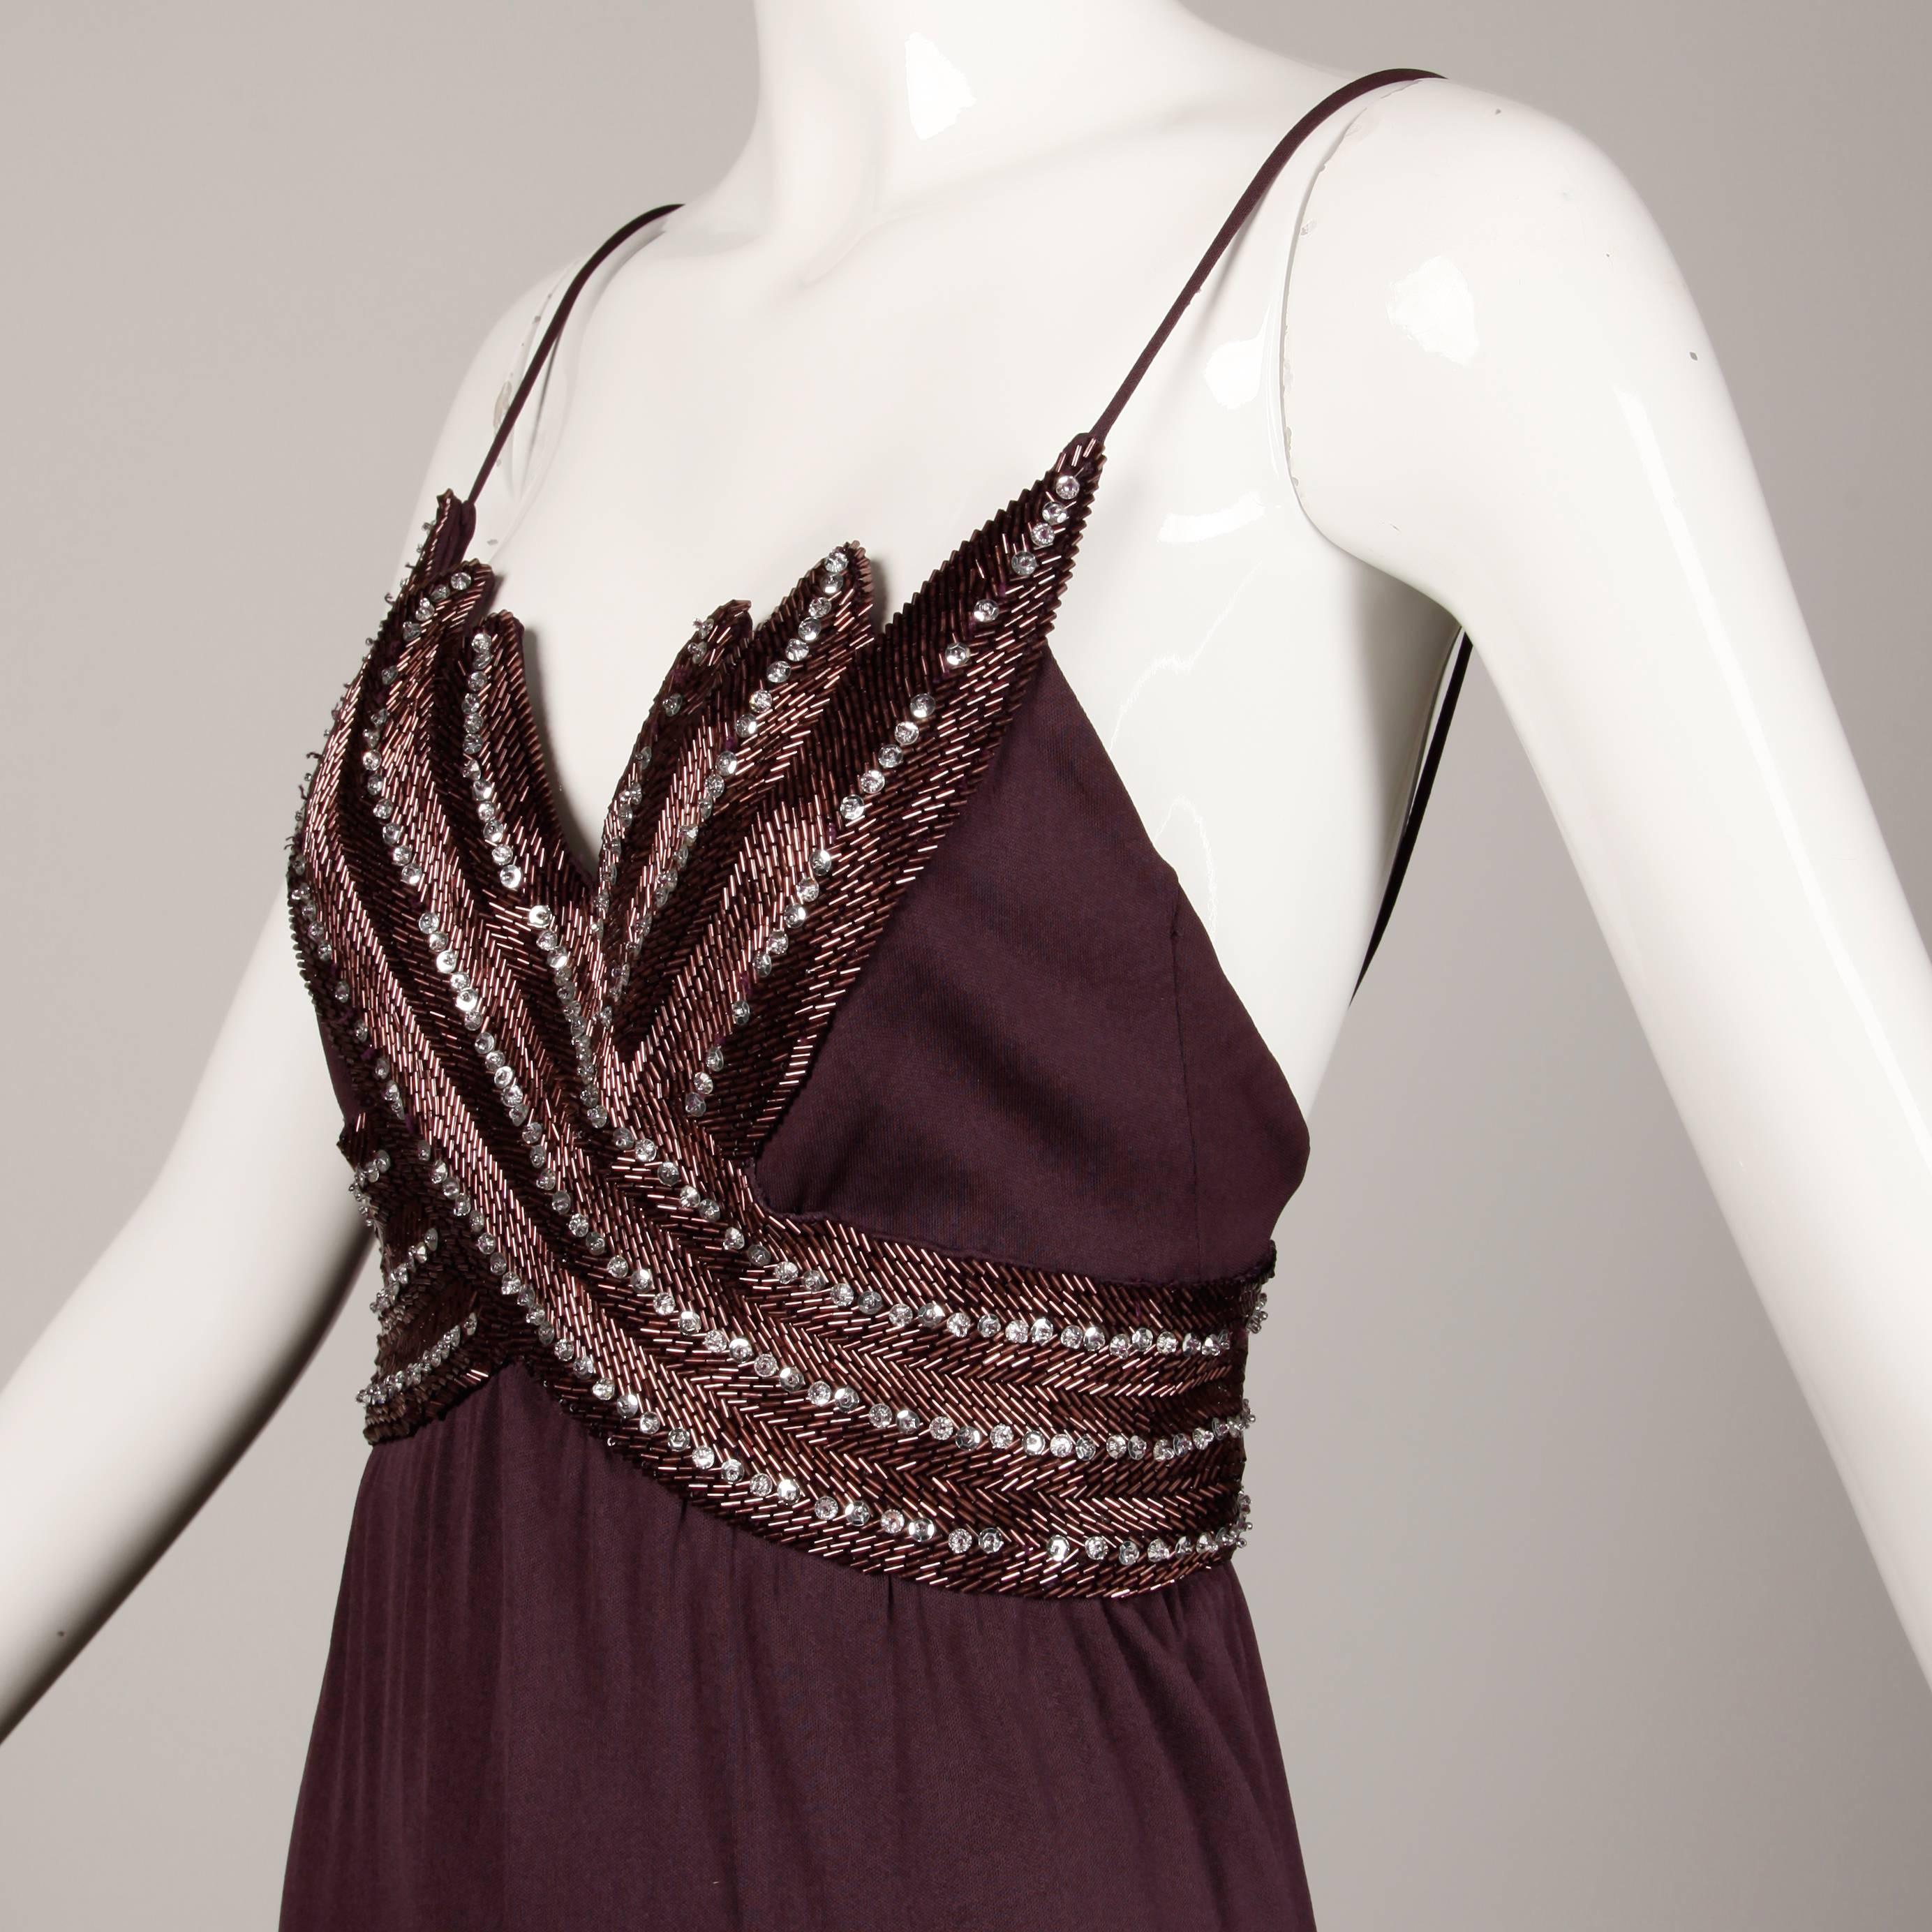 Slinky vintage 1970s plum silk jersey disco dress with metallic sequins and beading by Victoria Royal for I. Magnin. Fully lined with rear metal zip, snap and hook closure.  The marked size is 8, but the dress fits like an XS. The bust measures